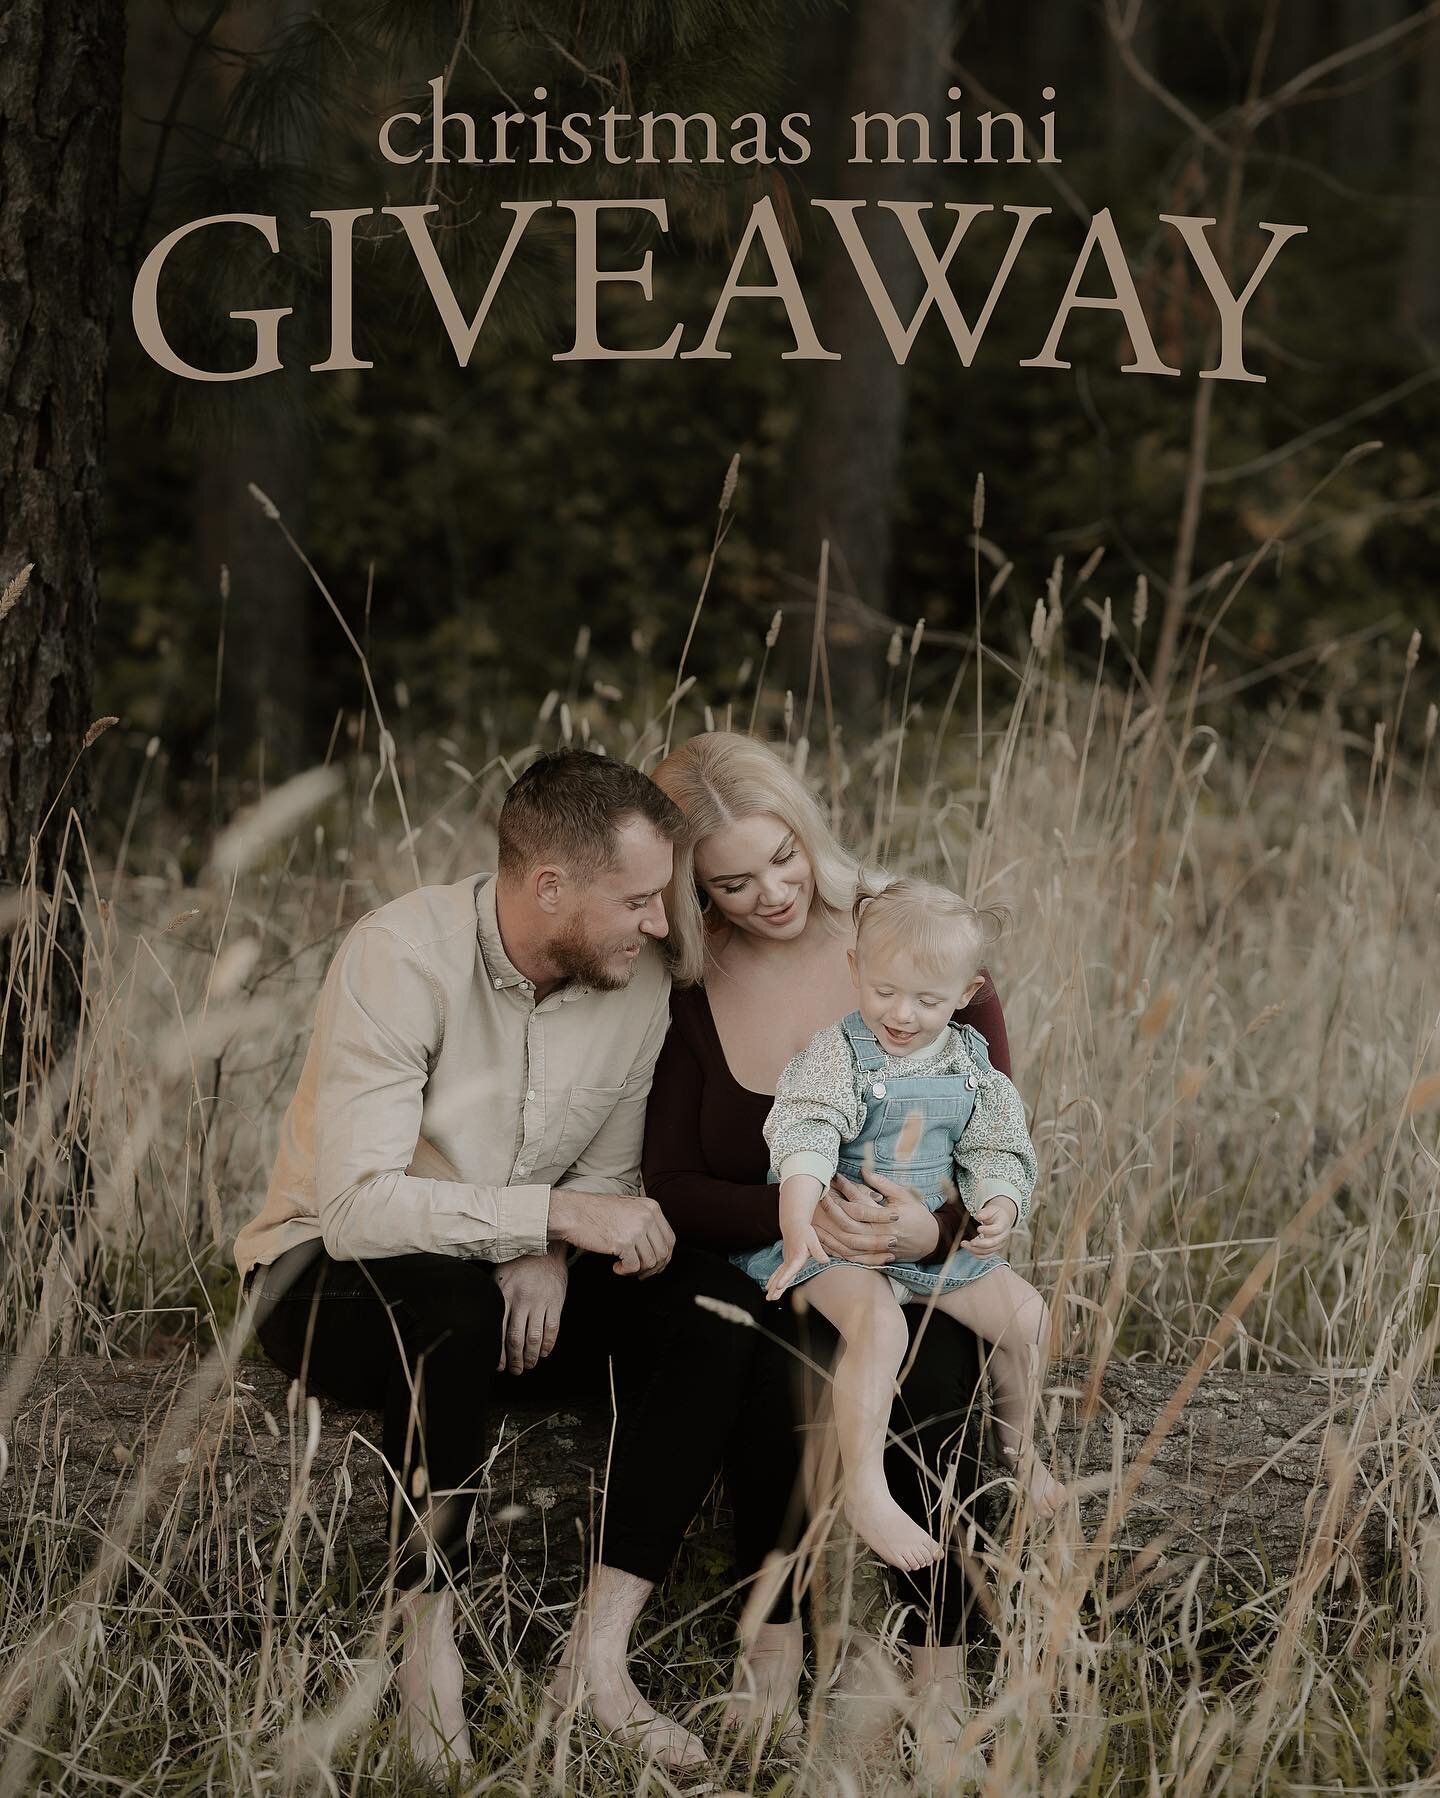 🤎 GIVEAWAY TIME 🤎
With my Christmas minis releasing later this week i thought I would give away a mini session of your choice (outdoor forest location or indoor lightly themed Seacombe Gardens studio )
20 minute session, ALL images!! 

All you need